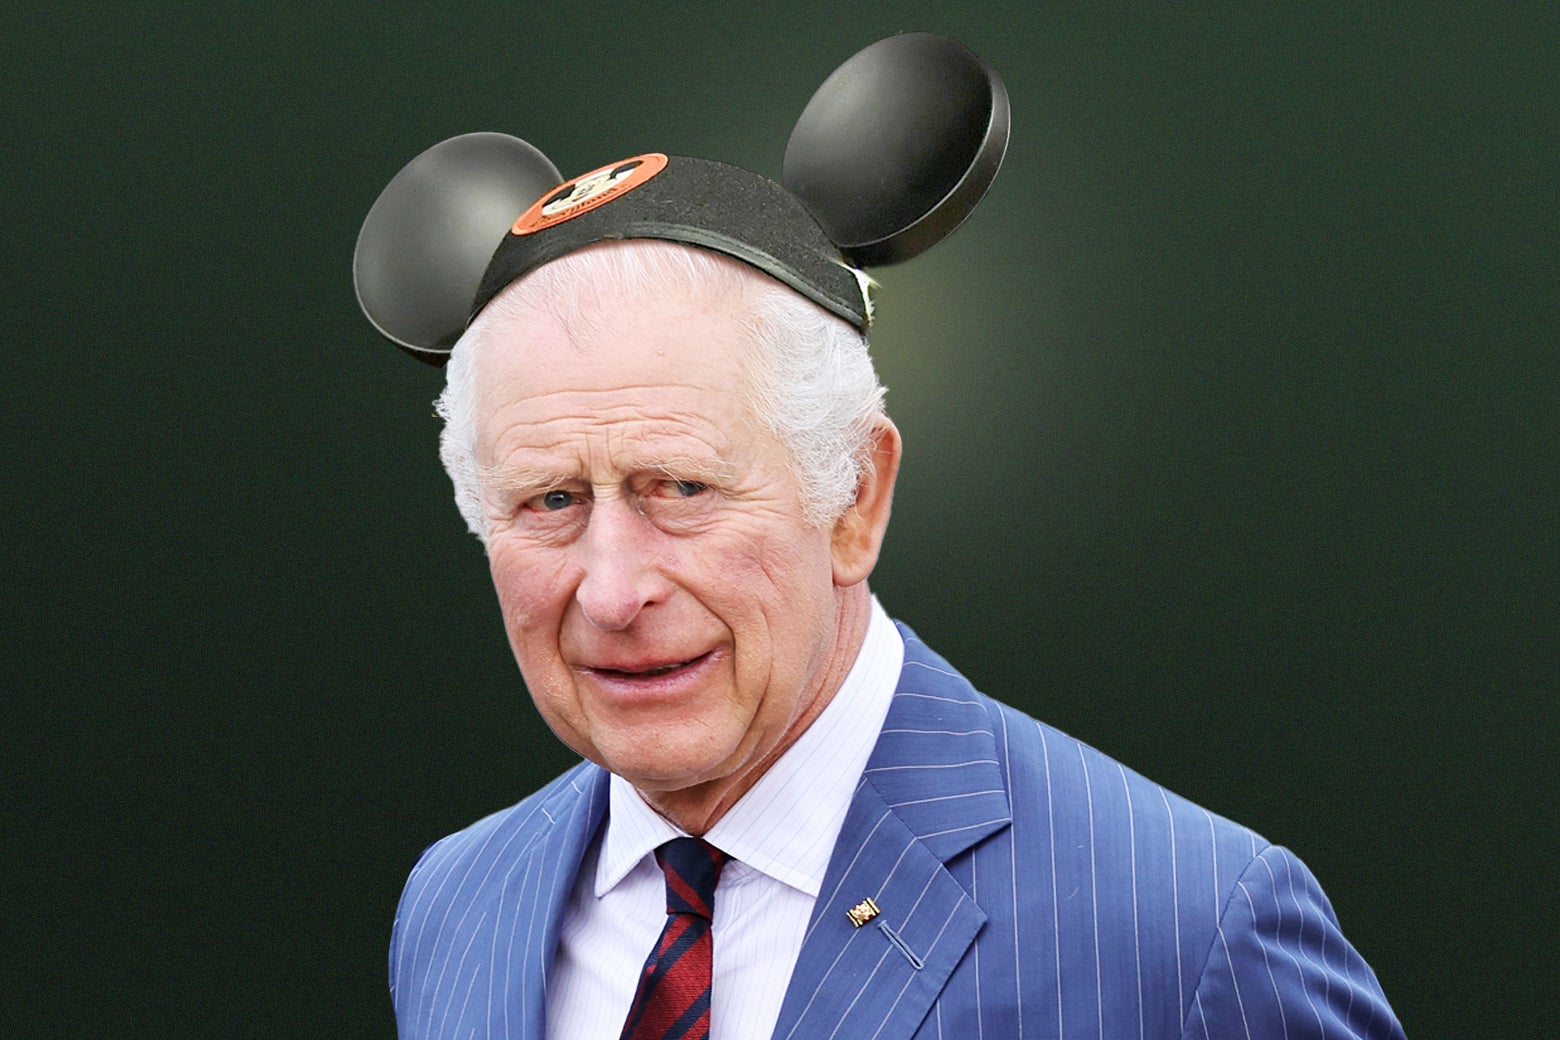 A photo of King Charles, altered to show him wearing Mickey Mouse ears.